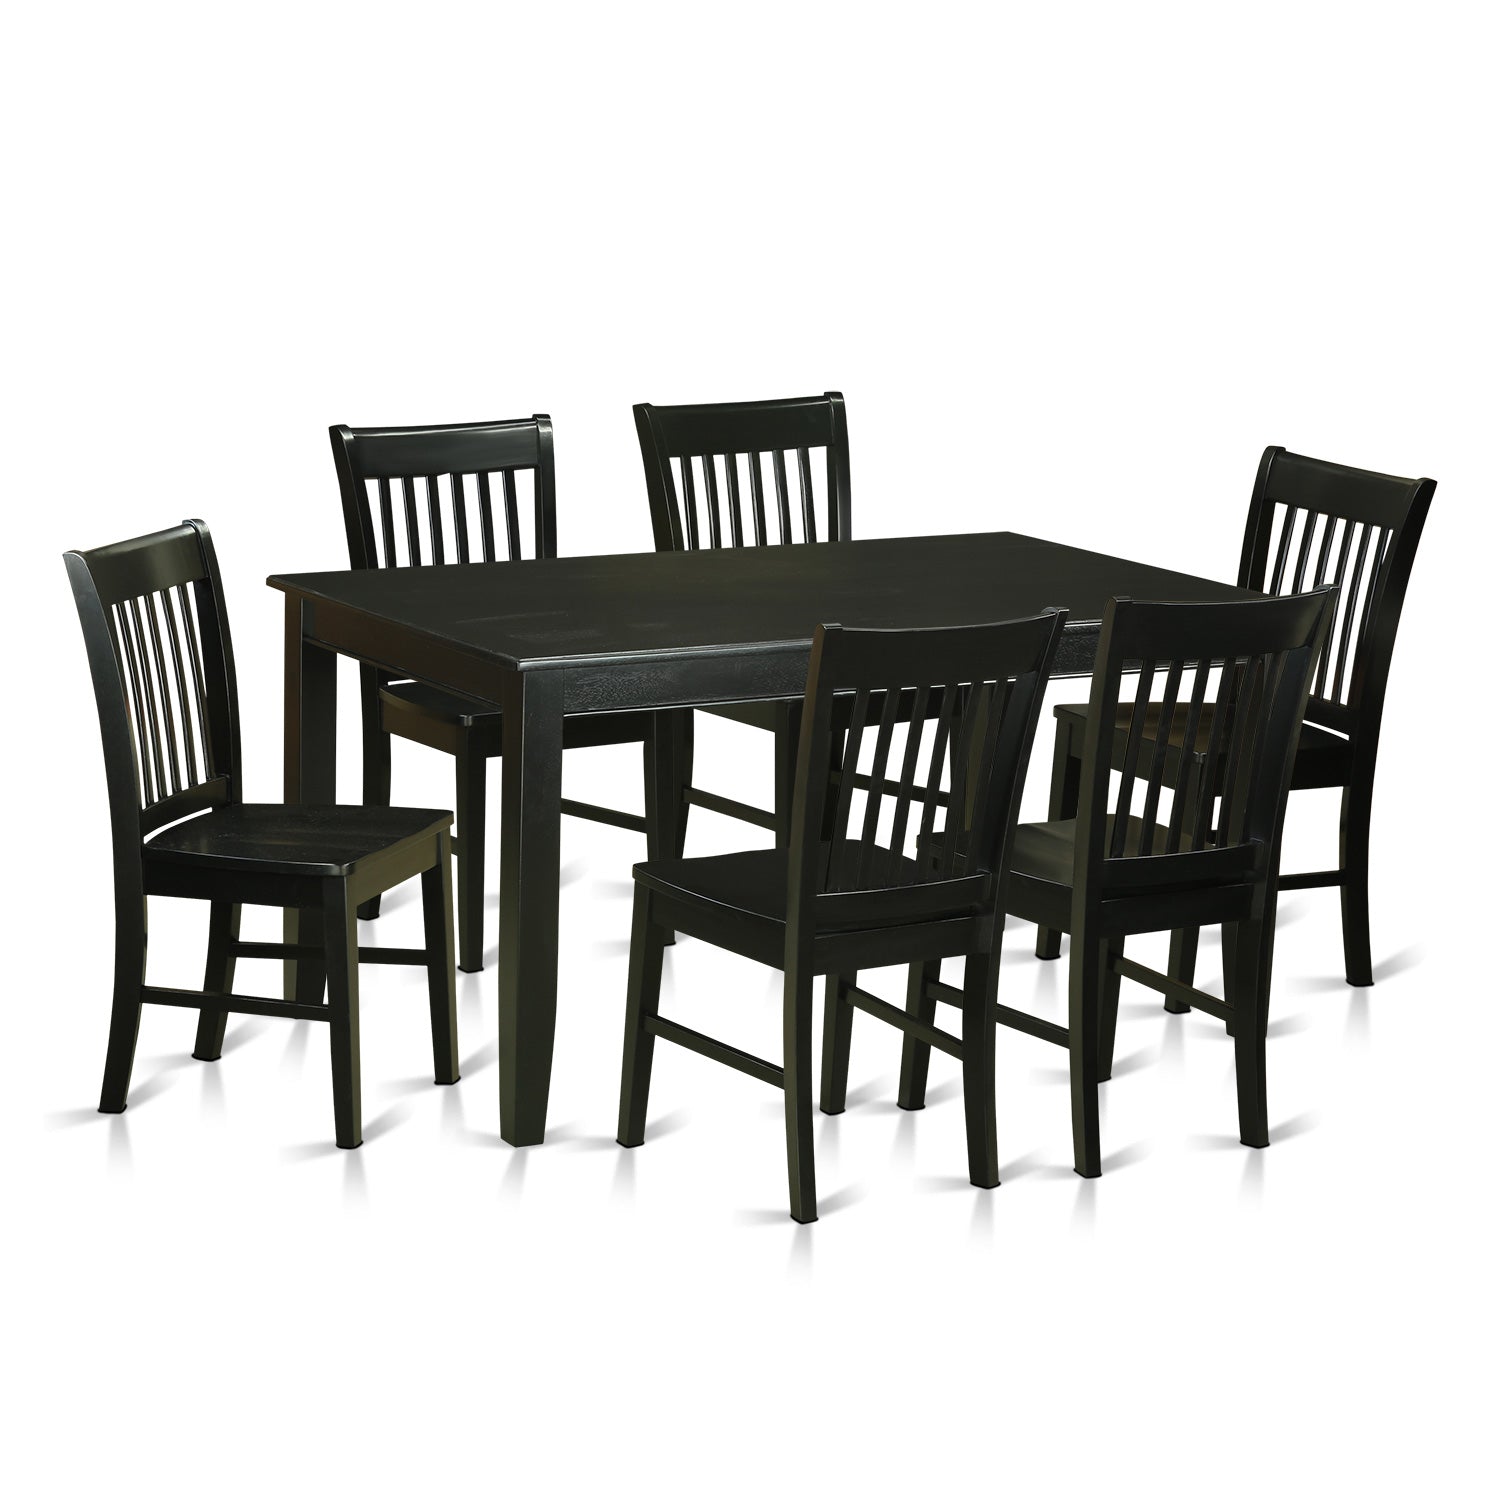 Dudley 7 Pc Black Dining room Kitchen Table and 6 Slat Back Chairs Set